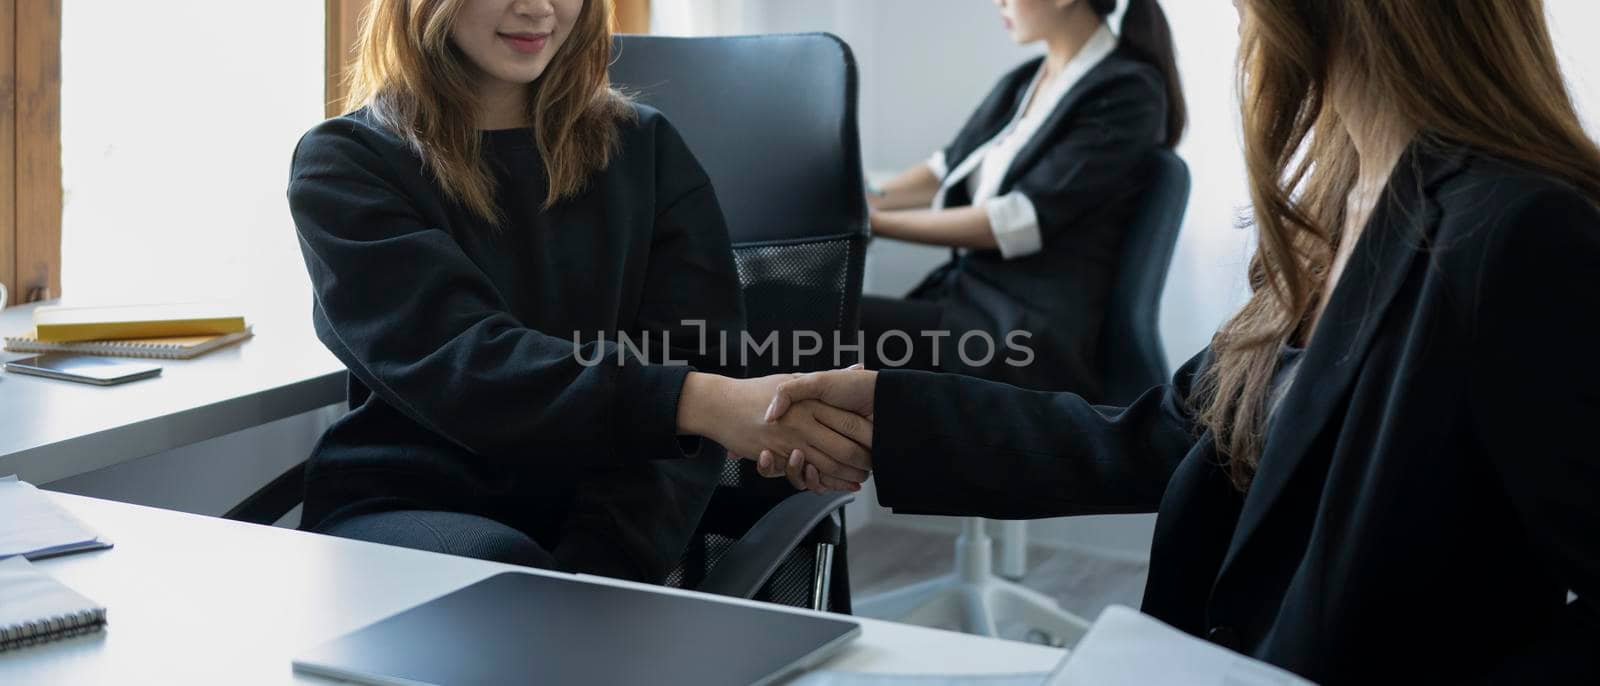 Two sucsessful businesspeople shaking hands after negotiations or finishing up meeting.